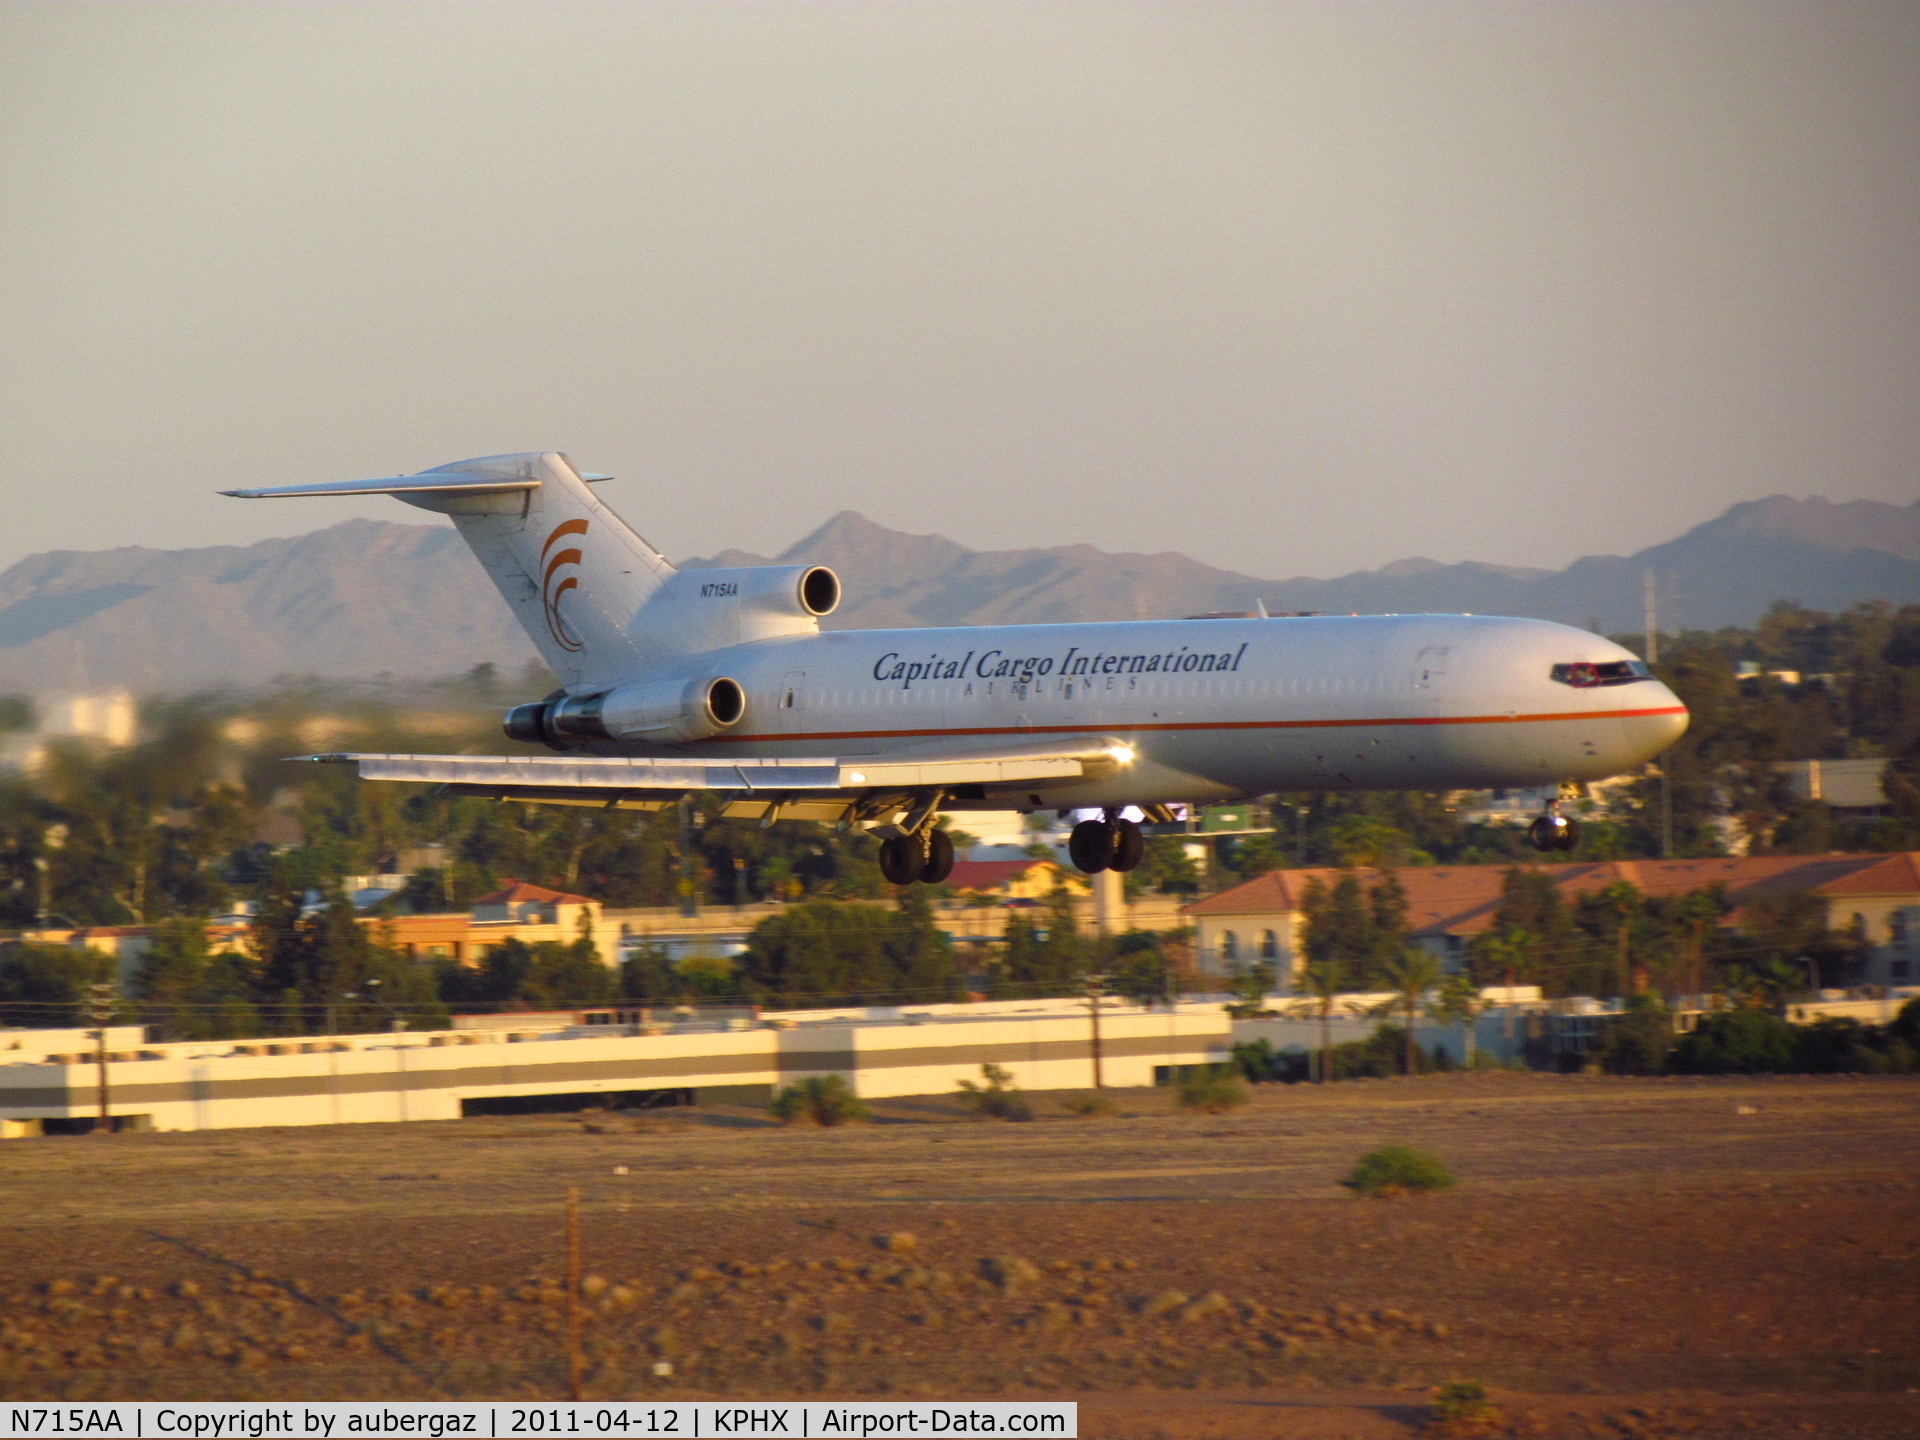 N715AA, 1981 Boeing 727-223 C/N 22470, Capitol Cargo Int'l. Early evening arrival at PHX